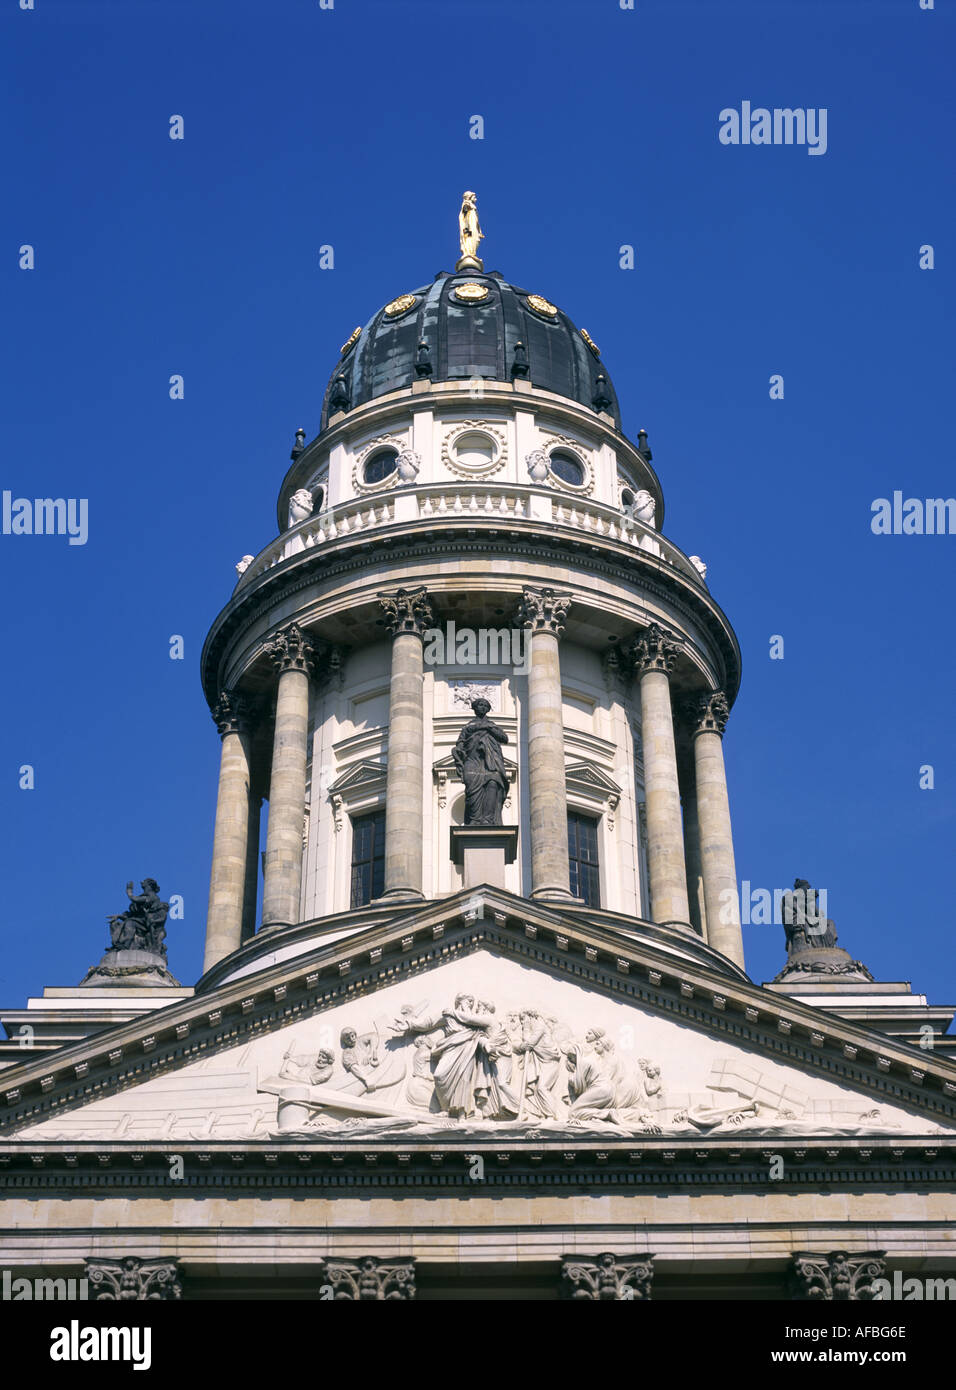 Franzosischer Dom French Cathedral in Berlin Germany completed in 1705 for Huguenot refugees Stock Photo